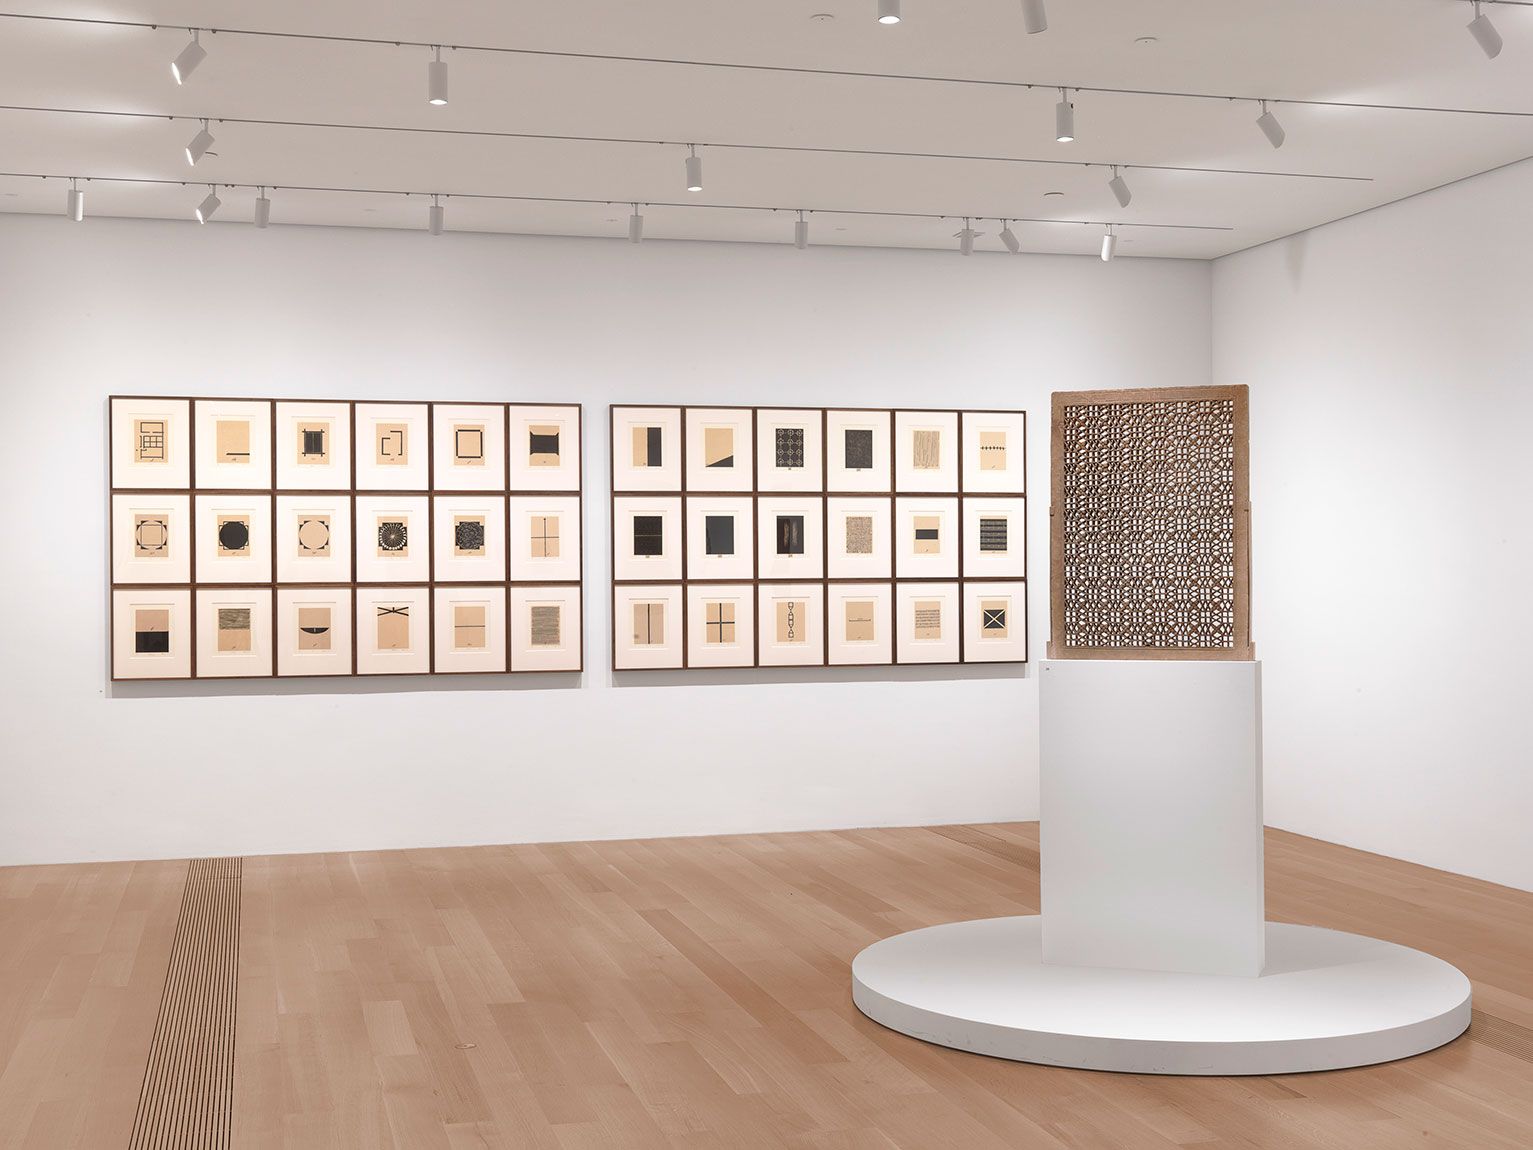 An exhibition view of the Lower West Gallery, including a portfolio by Zarina titled "Home is a Foreign Place," 36 framed woodcut prints hung in a grid on the south wall, and a red sandstone "Jali," or windowscreen, by an unidentified artist on a pedestal in the center.